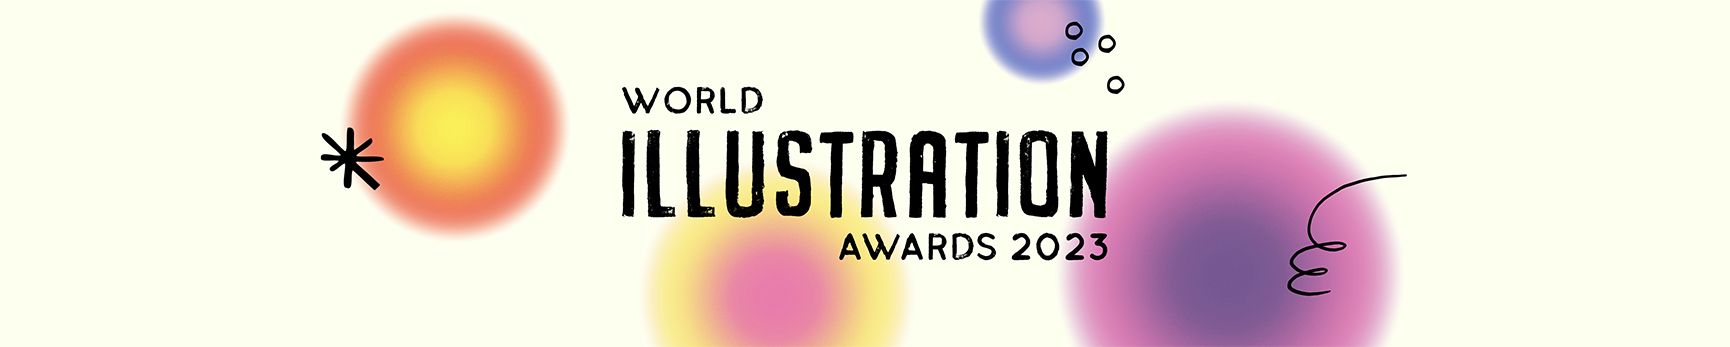 World Illustration Awards 2023 black and white text with bright purple, pink, yellow and orange circles in the background